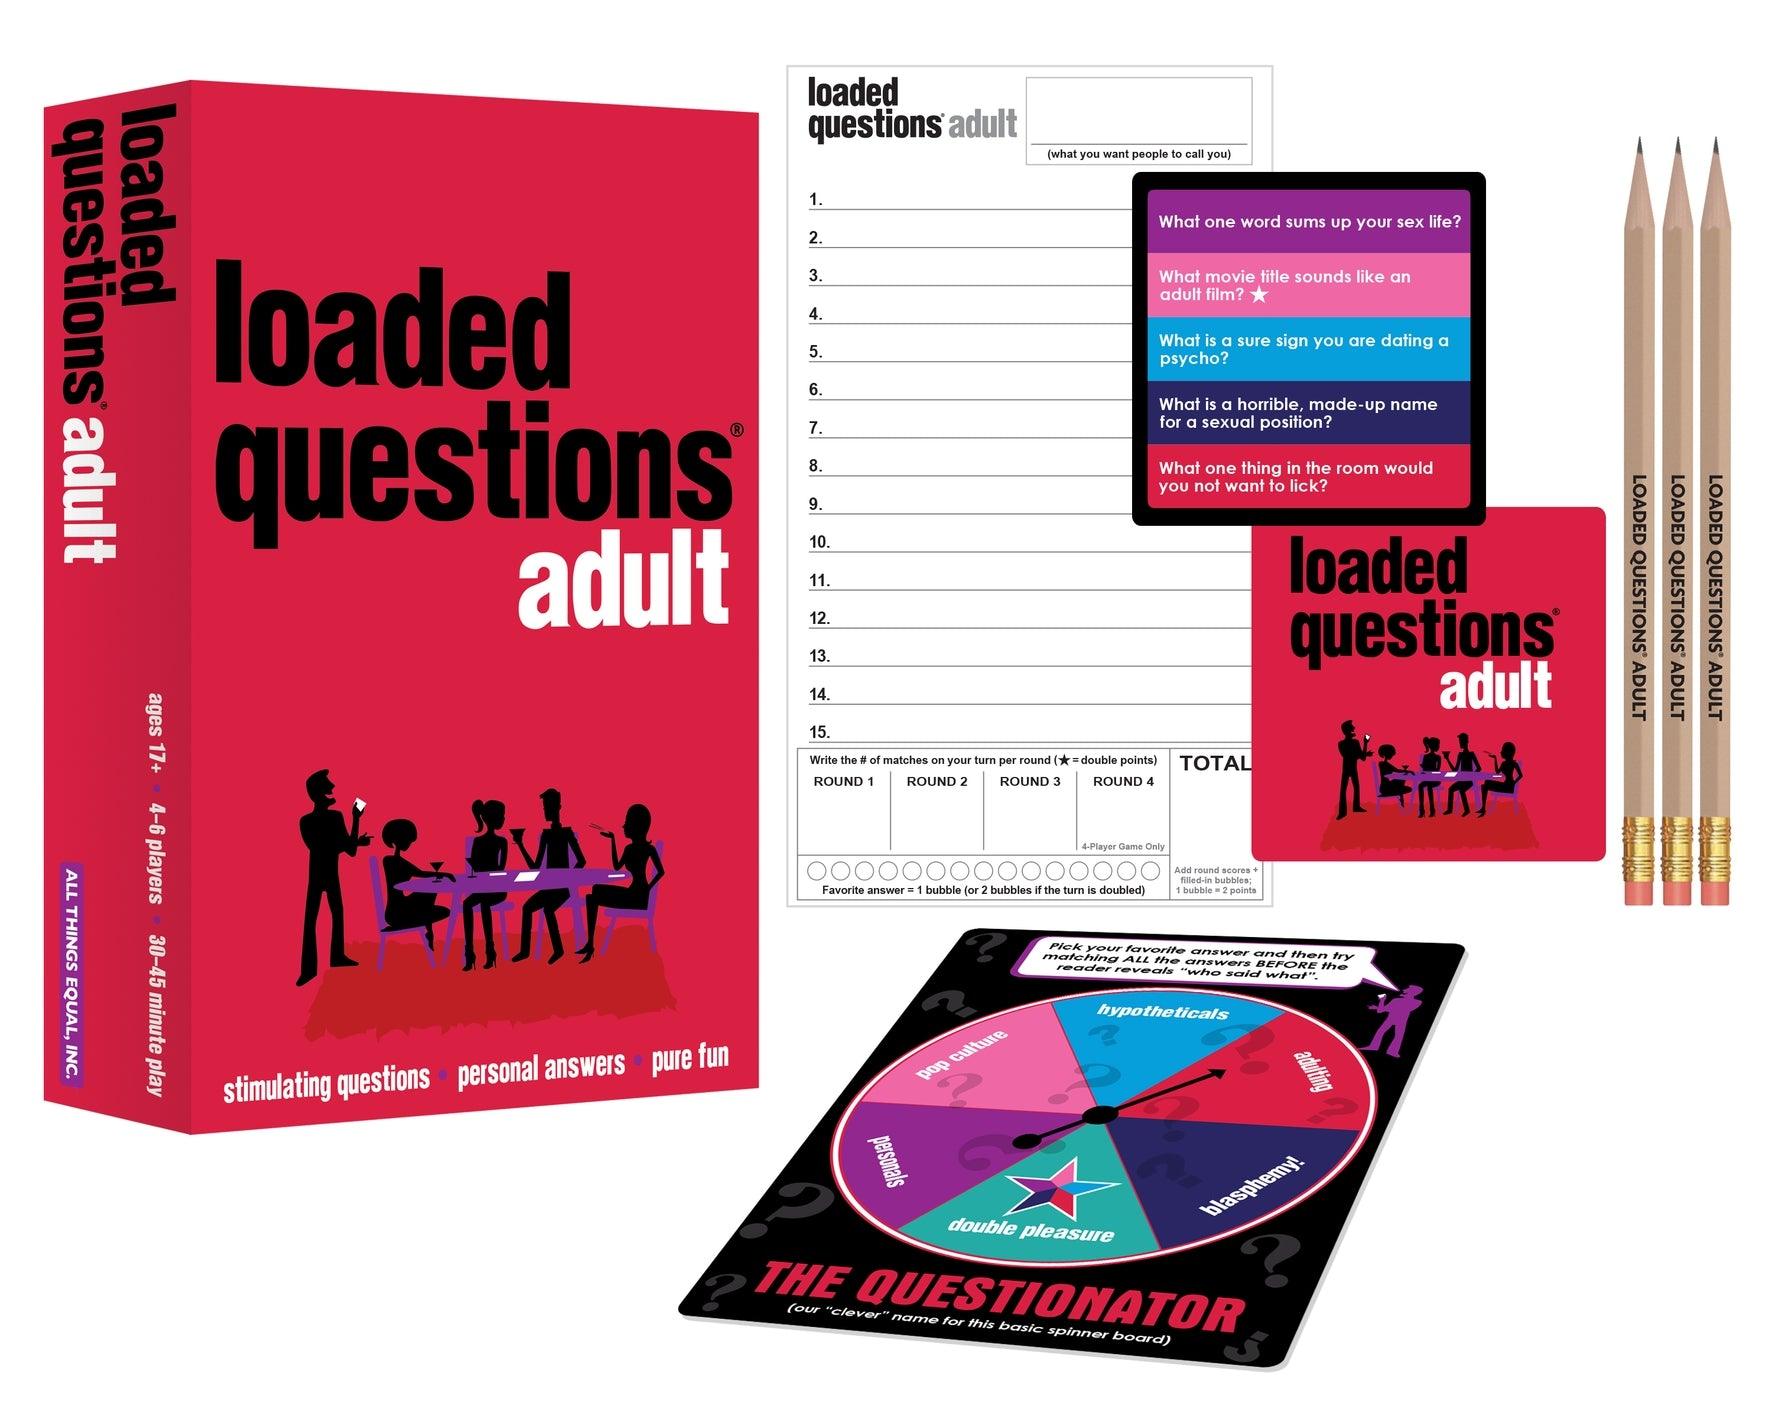 Adult Loaded Questions - (Newly Updated!) - Sapphic Society